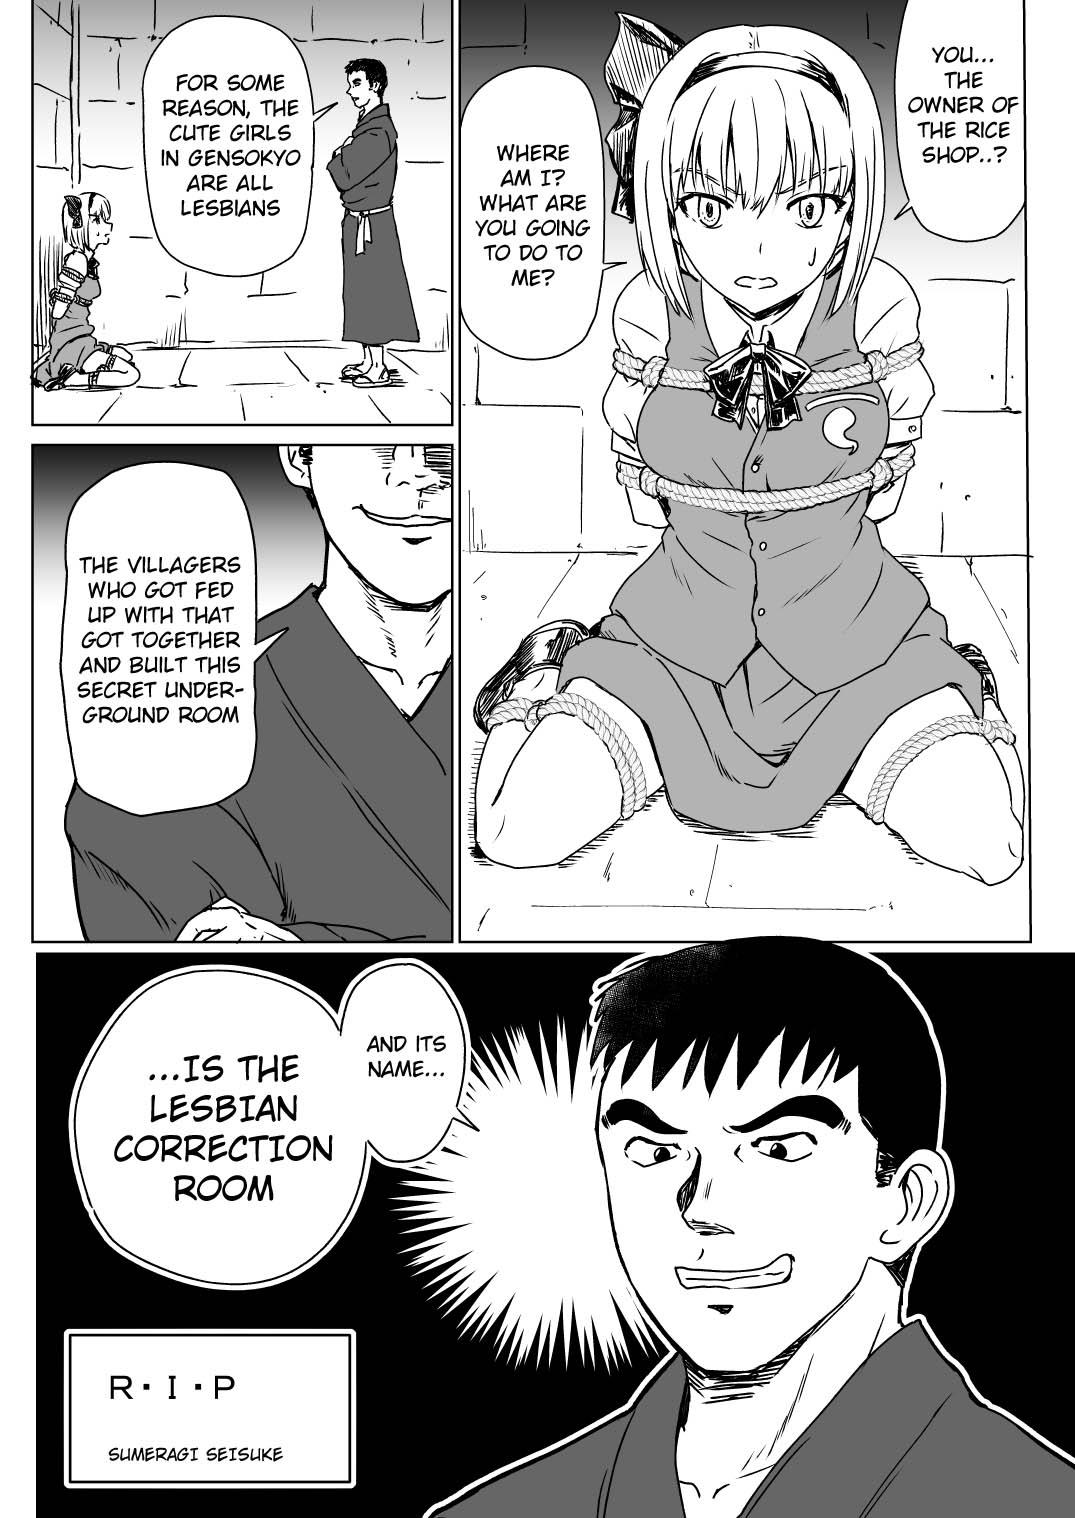 Exibicionismo R. I. P. - Touhou project Best Blowjobs Ever - Page 3